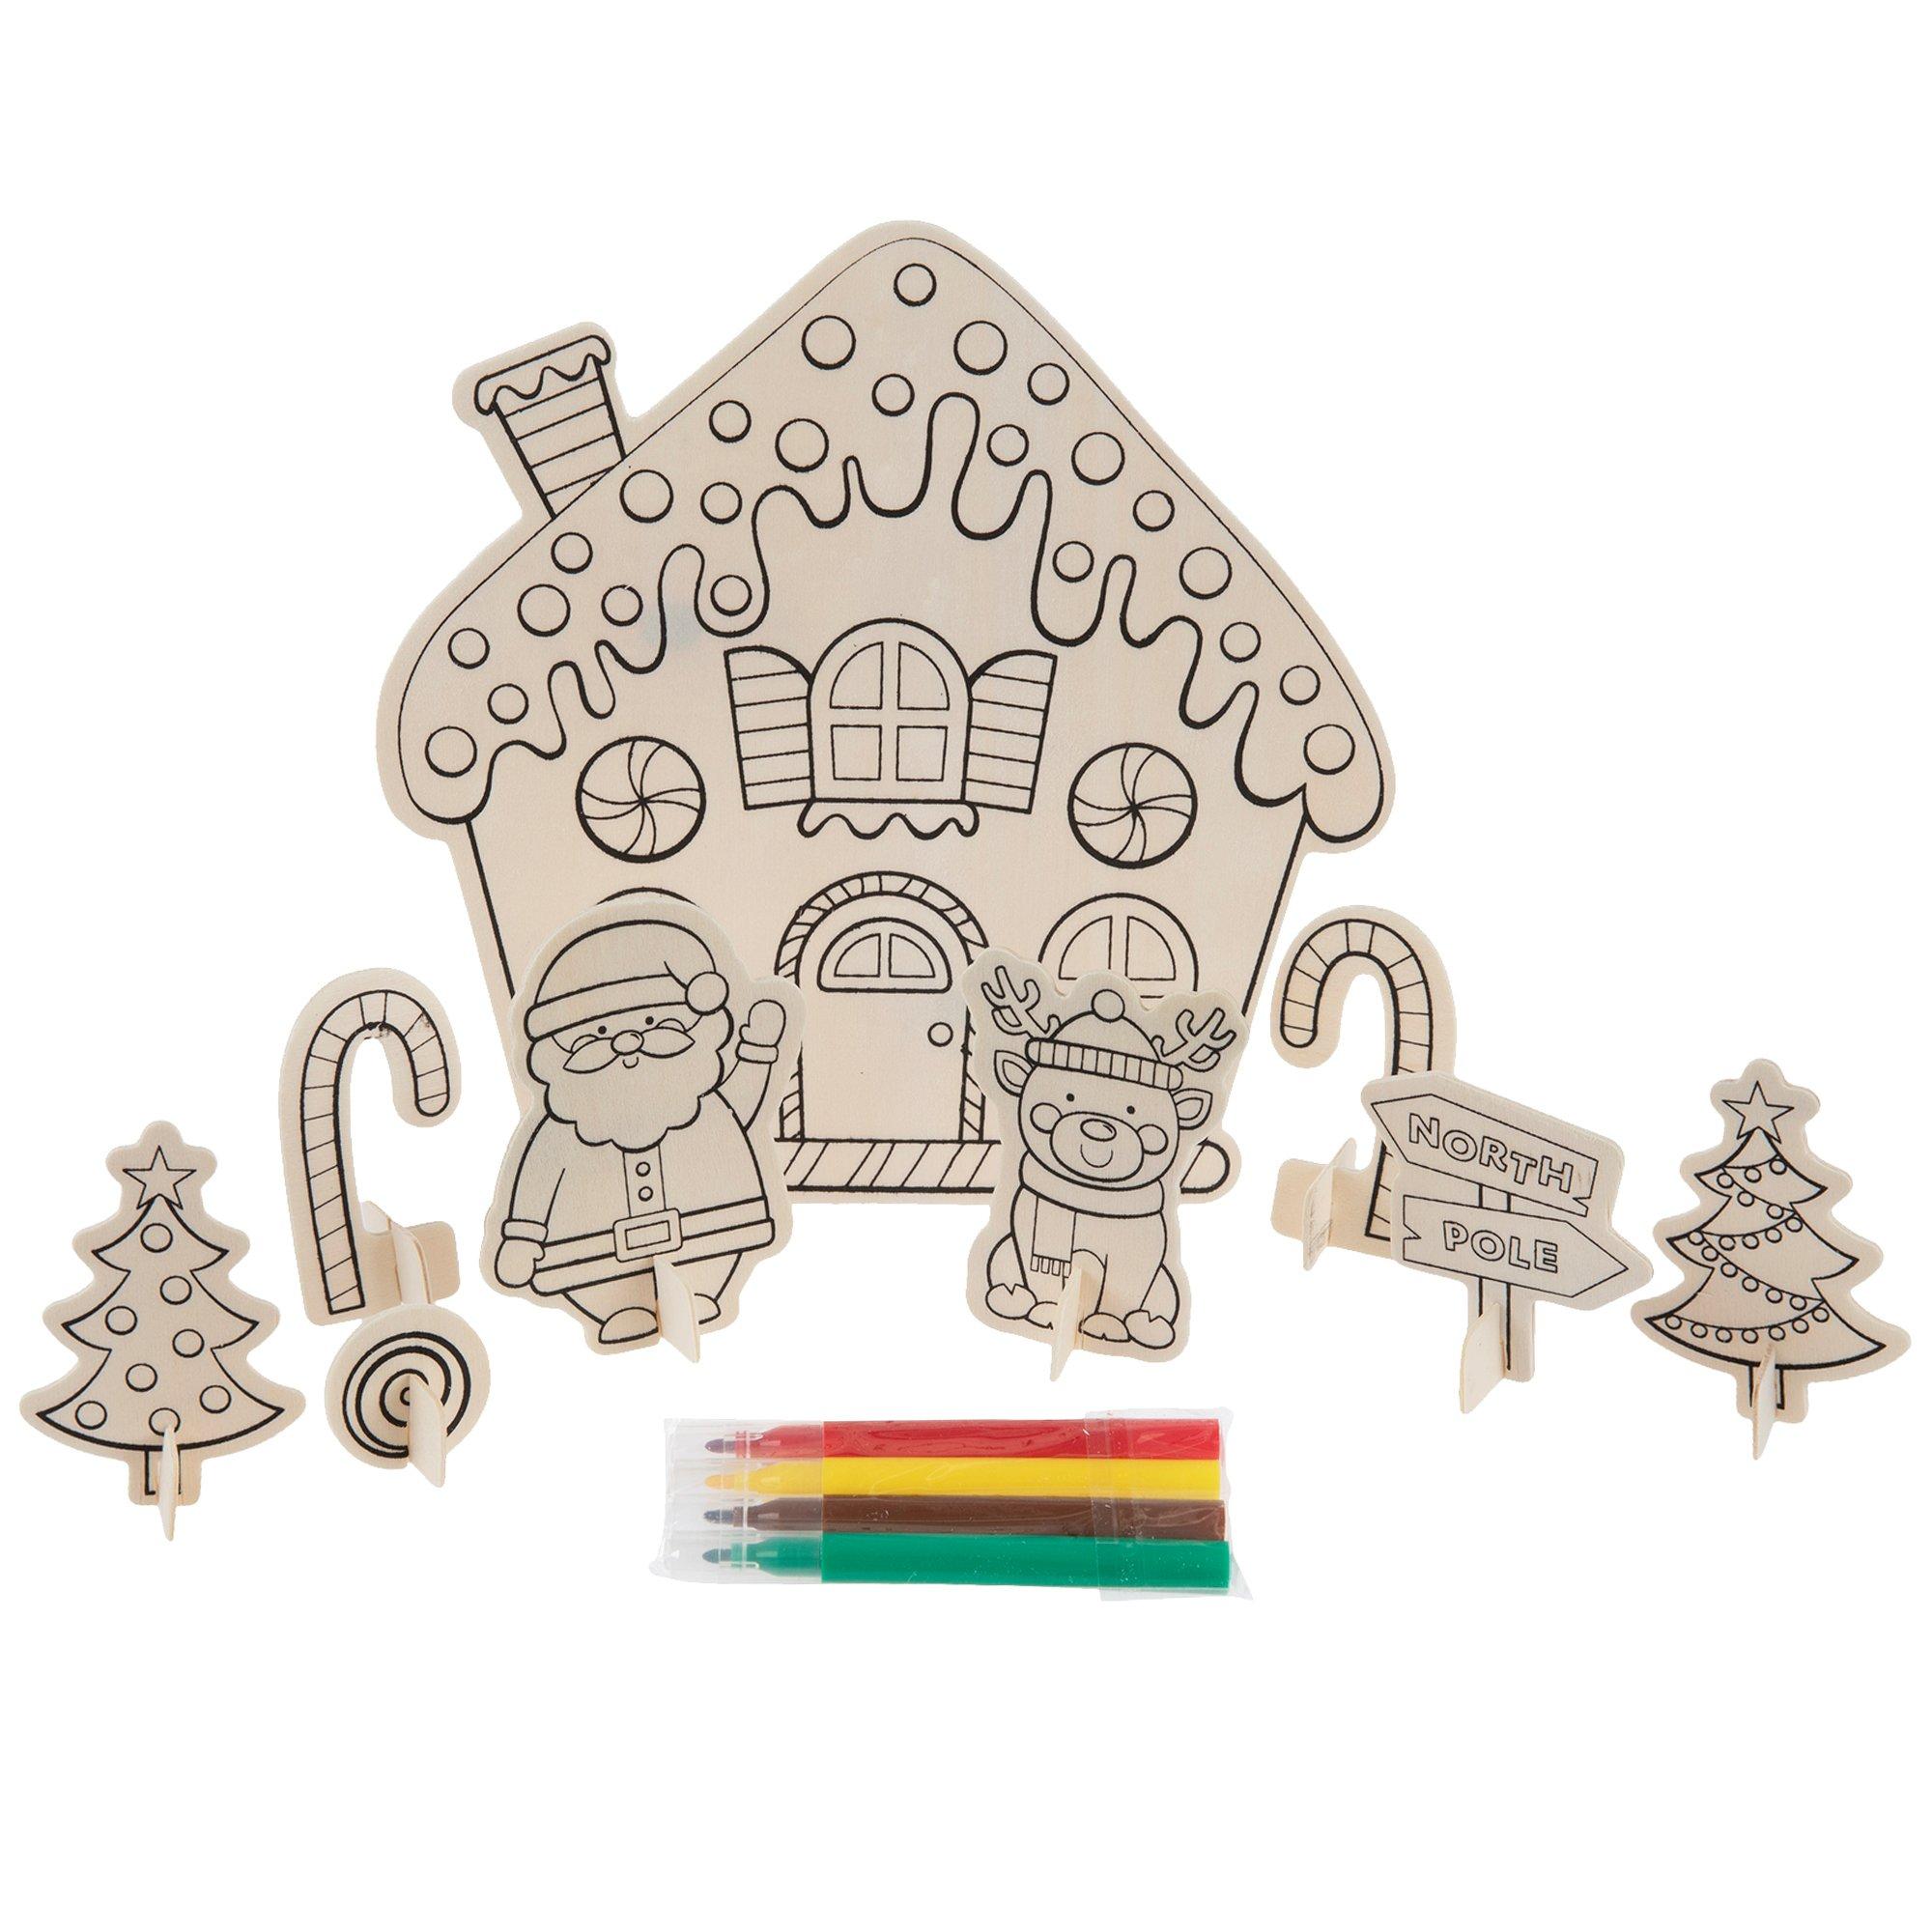 Gingerbread House Craft Kit Graphic by tshirtzone83 · Creative Fabrica